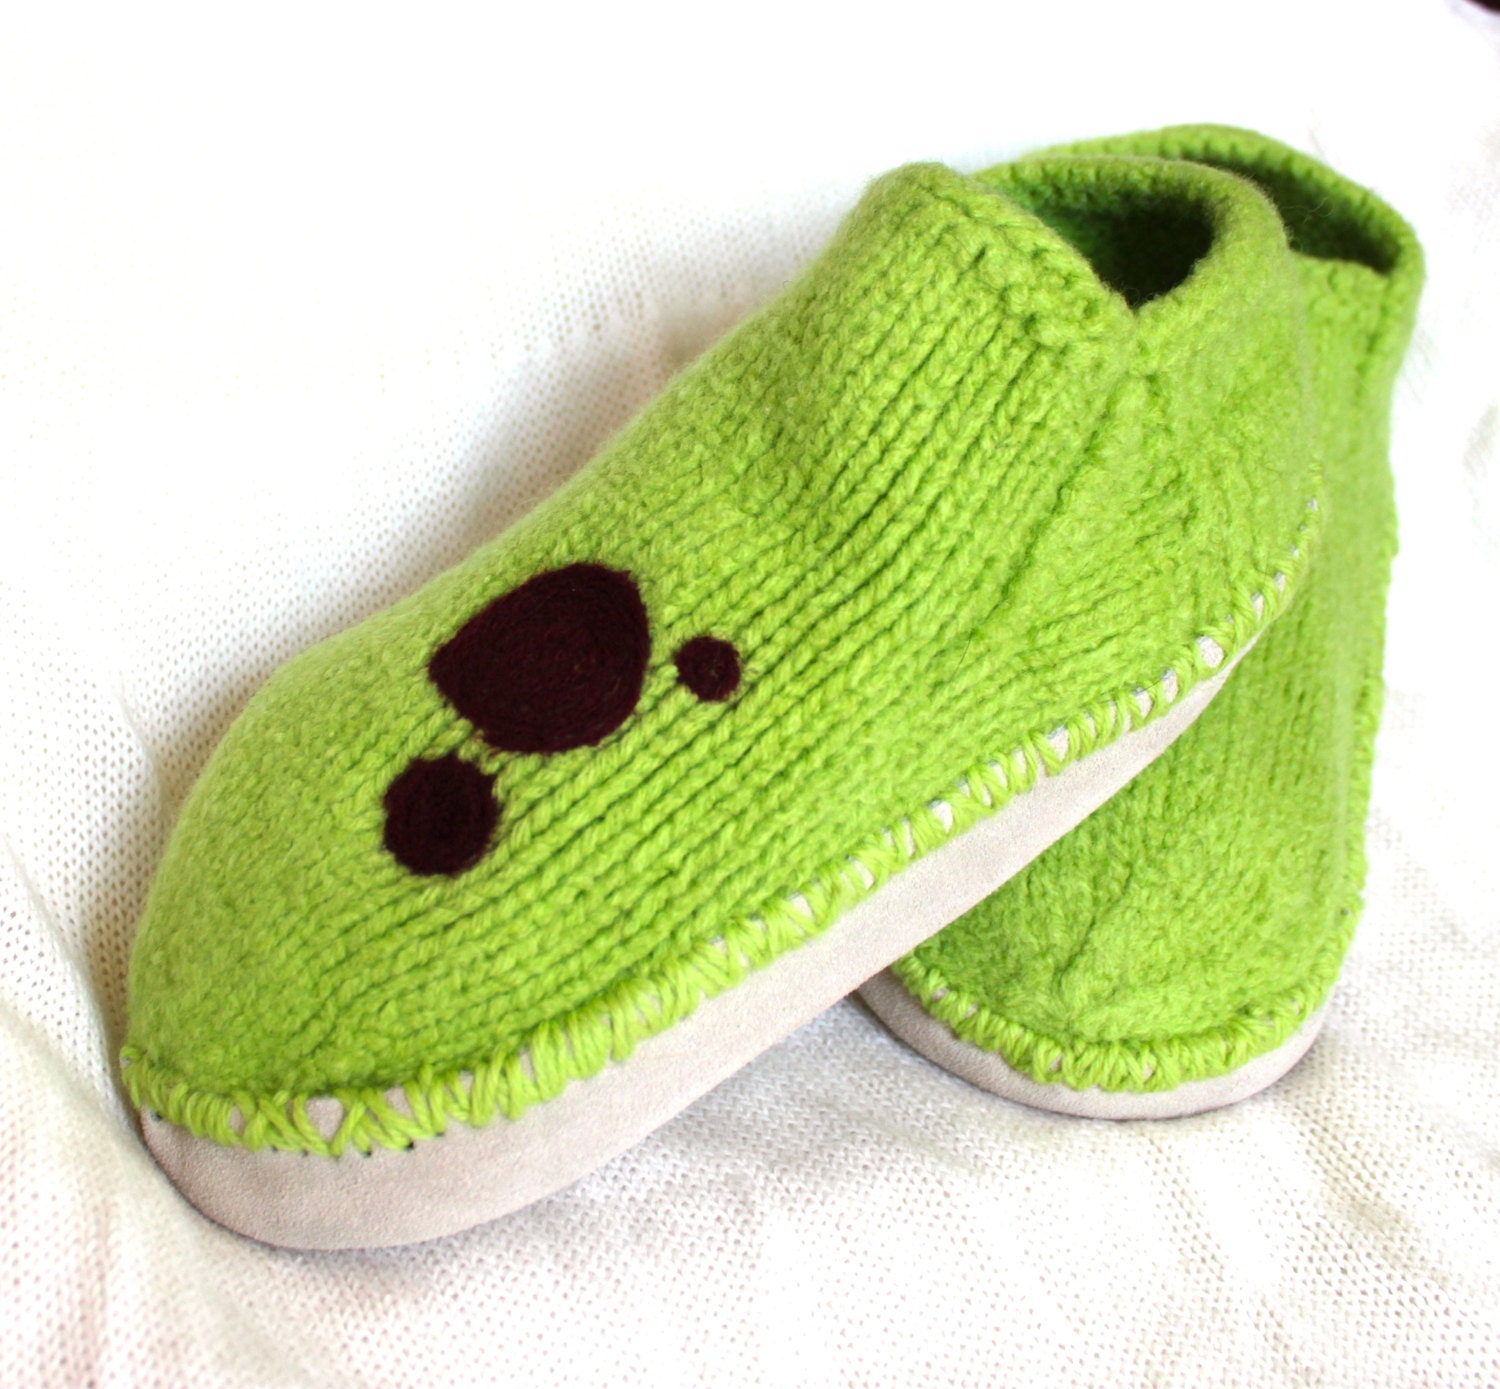 Felted Wool Slippers with Leather bottom - green with burgundy polka dots - MollysPurl